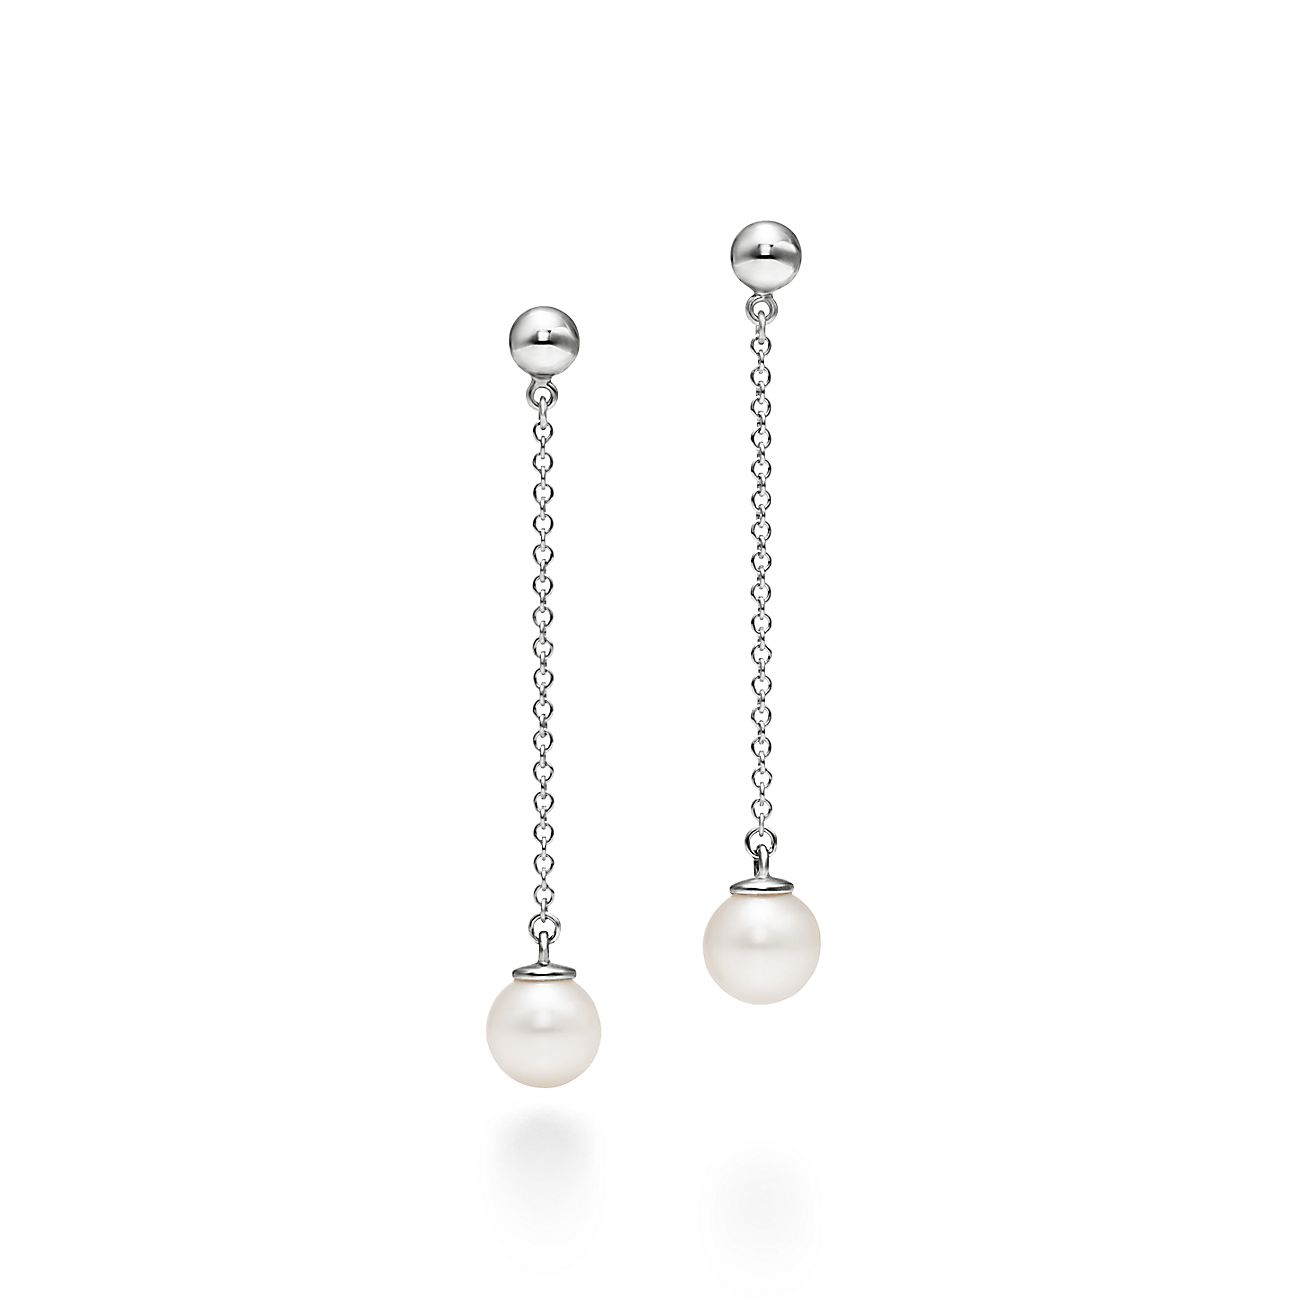 Attrape Soleil Long Suncatcher Earrings Mounted on 3 925 Silver Strings,  Feathers and Pearls 